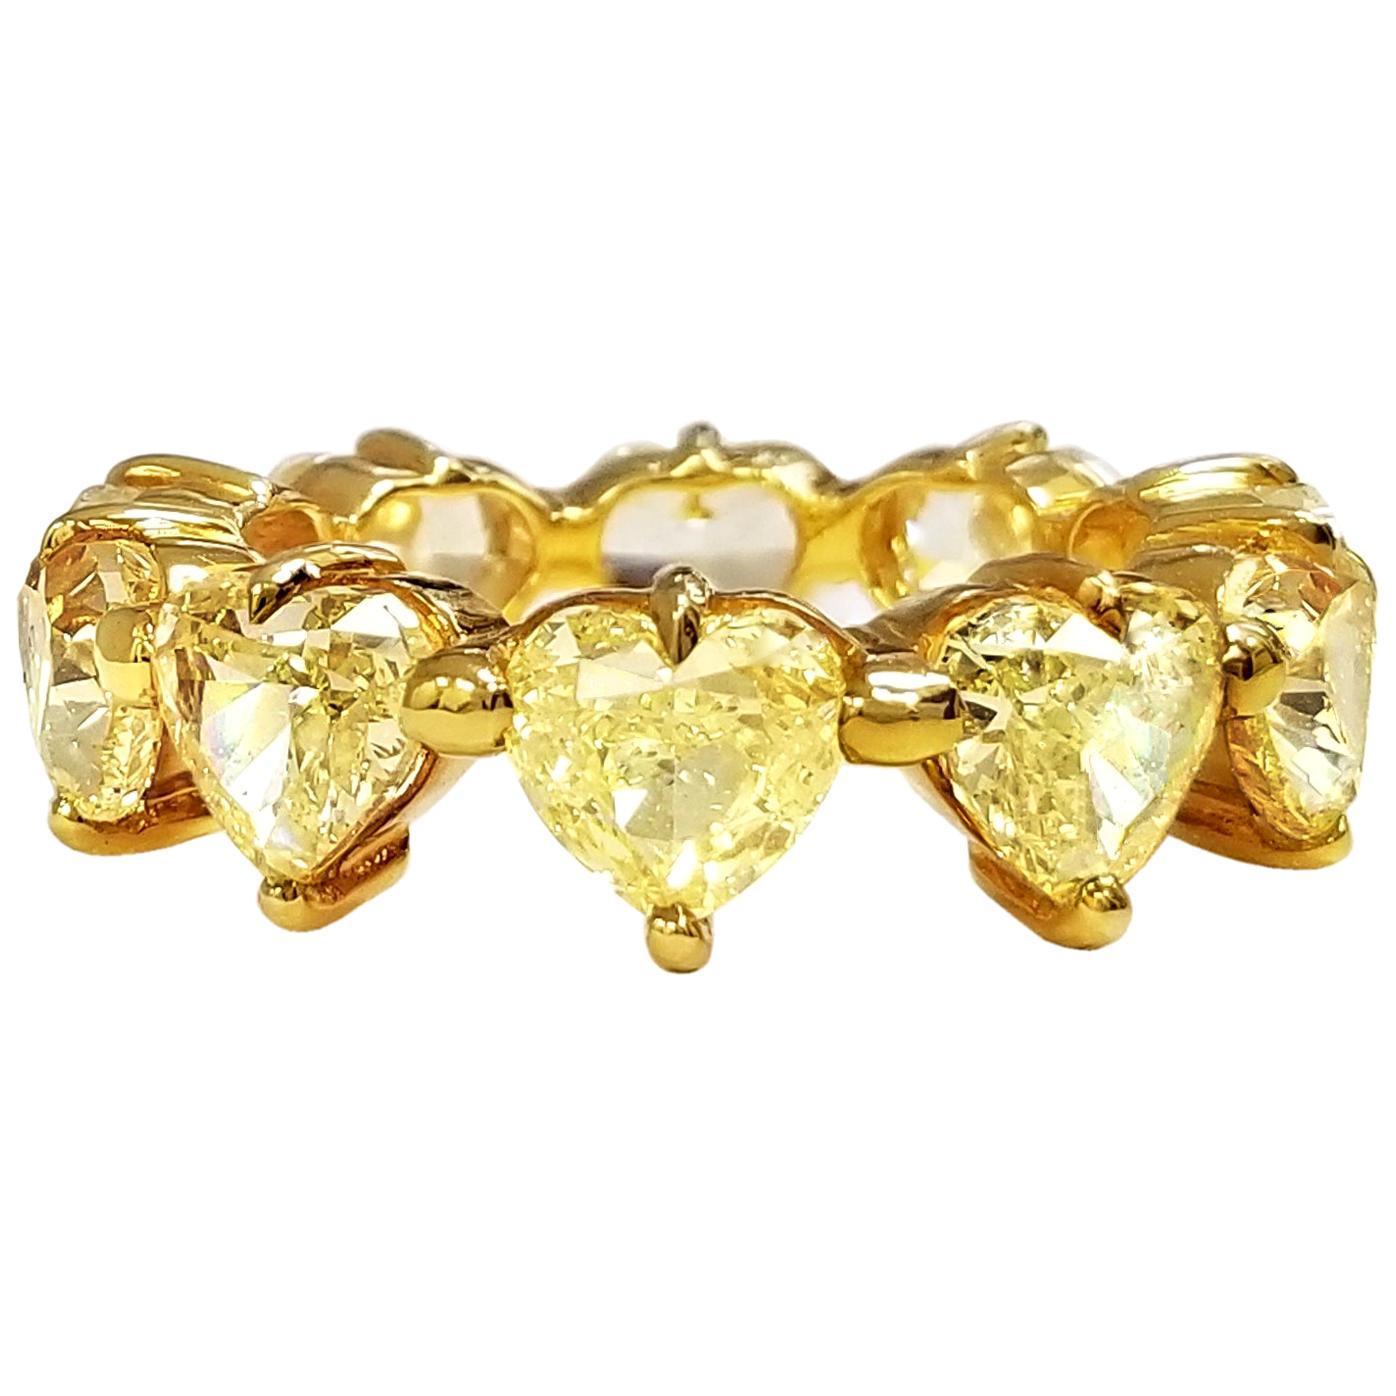 Scarselli Heart Band Ring in 18 Karat Gold with Natural Yellow Diamonds